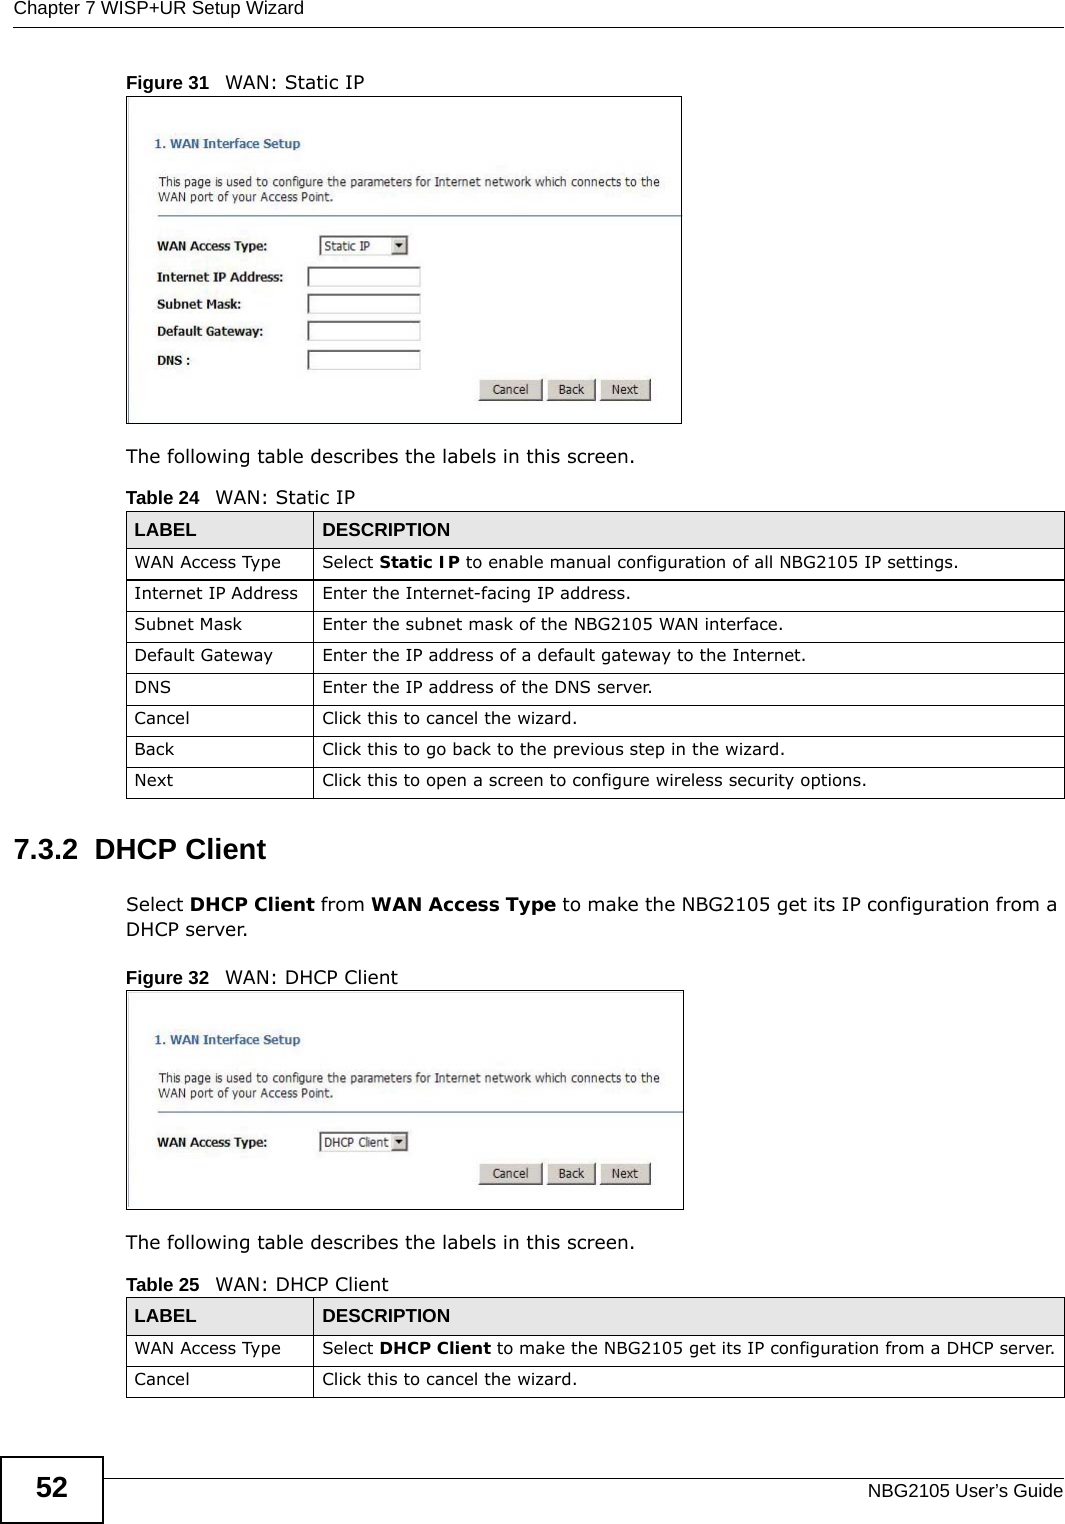 Chapter 7 WISP+UR Setup WizardNBG2105 User’s Guide52Figure 31   WAN: Static IPThe following table describes the labels in this screen.7.3.2  DHCP ClientSelect DHCP Client from WAN Access Type to make the NBG2105 get its IP configuration from a DHCP server.Figure 32   WAN: DHCP Client The following table describes the labels in this screen.Table 24   WAN: Static IPLABEL DESCRIPTIONWAN Access Type Select Static IP to enable manual configuration of all NBG2105 IP settings.Internet IP Address Enter the Internet-facing IP address.Subnet Mask Enter the subnet mask of the NBG2105 WAN interface.Default Gateway Enter the IP address of a default gateway to the Internet.DNS Enter the IP address of the DNS server.Cancel Click this to cancel the wizard.Back Click this to go back to the previous step in the wizard.Next Click this to open a screen to configure wireless security options.Table 25   WAN: DHCP ClientLABEL DESCRIPTIONWAN Access Type Select DHCP Client to make the NBG2105 get its IP configuration from a DHCP server.Cancel Click this to cancel the wizard.